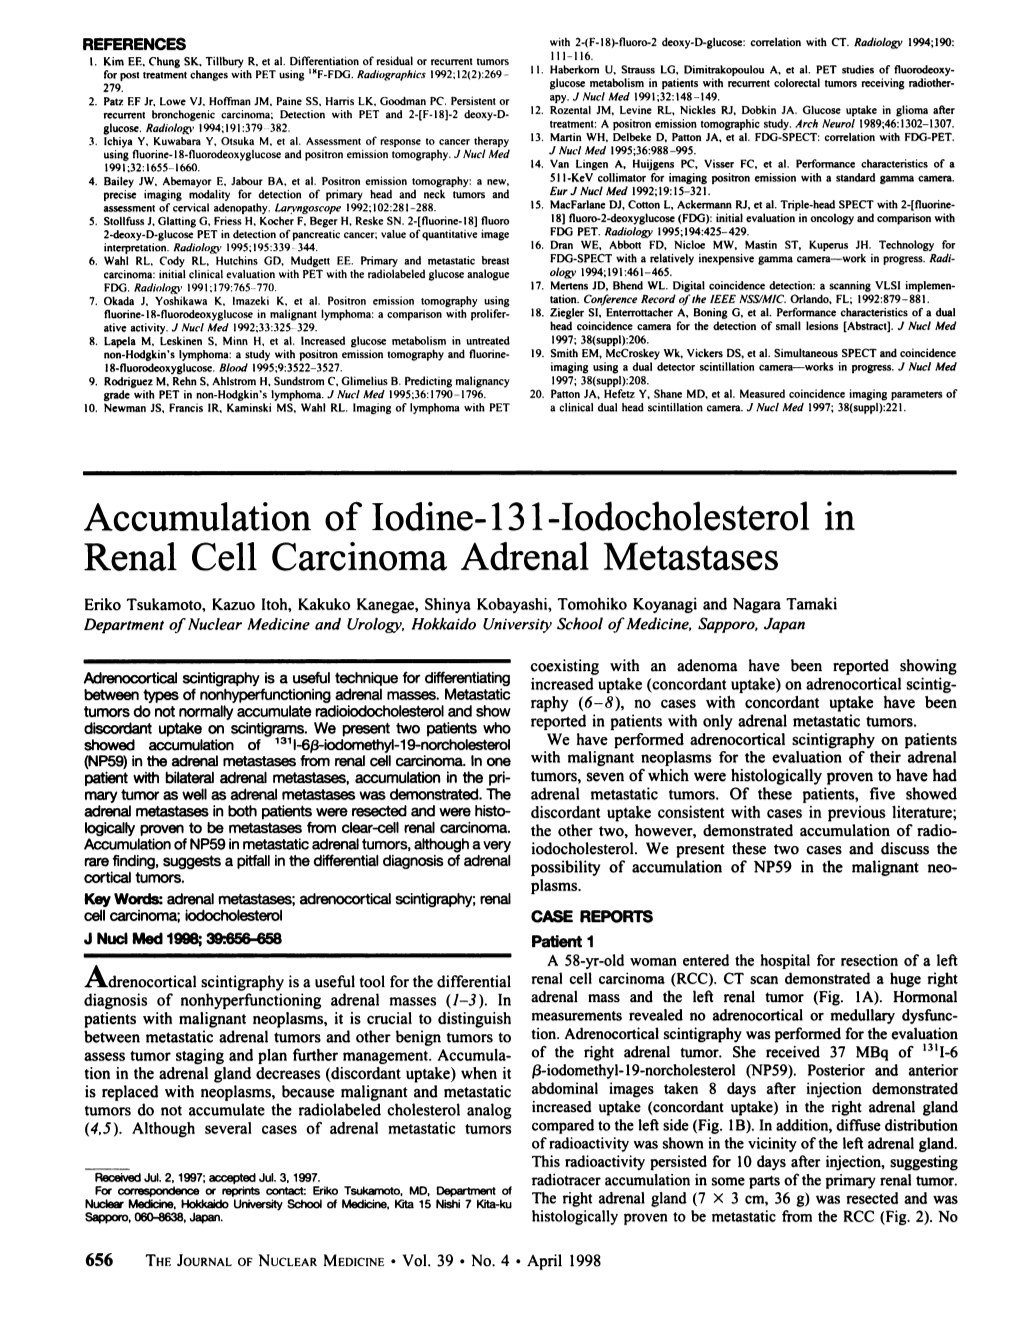 Accumulation of Iodine-131-Iodocholesterol in Renal Cell Carcinoma Adrenal MÃ©Tastases